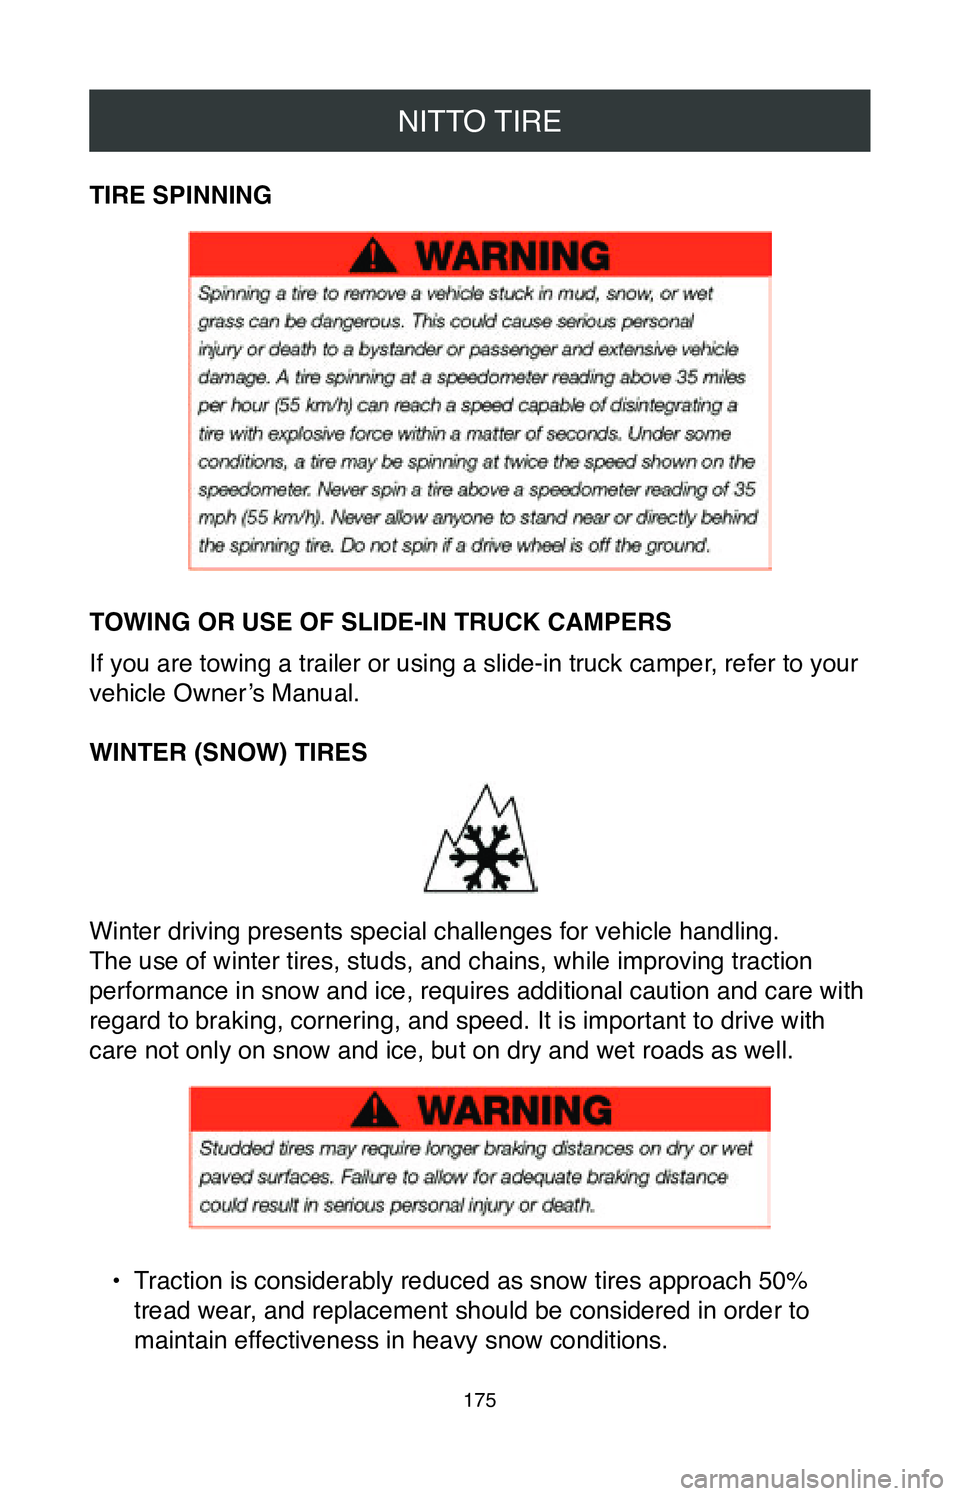 TOYOTA MIRAI 2020  Warranties & Maintenance Guides (in English) NITTO TIRE
175
TIRE SPINNING
TOWING OR USE OF SLIDE-IN TRUCK CAMPERS
If you are towing a trailer or using a slide-in truck camper, refer to your 
vehicle Owner’s Manual.
WINTER (SNOW) TIRES
Winter d